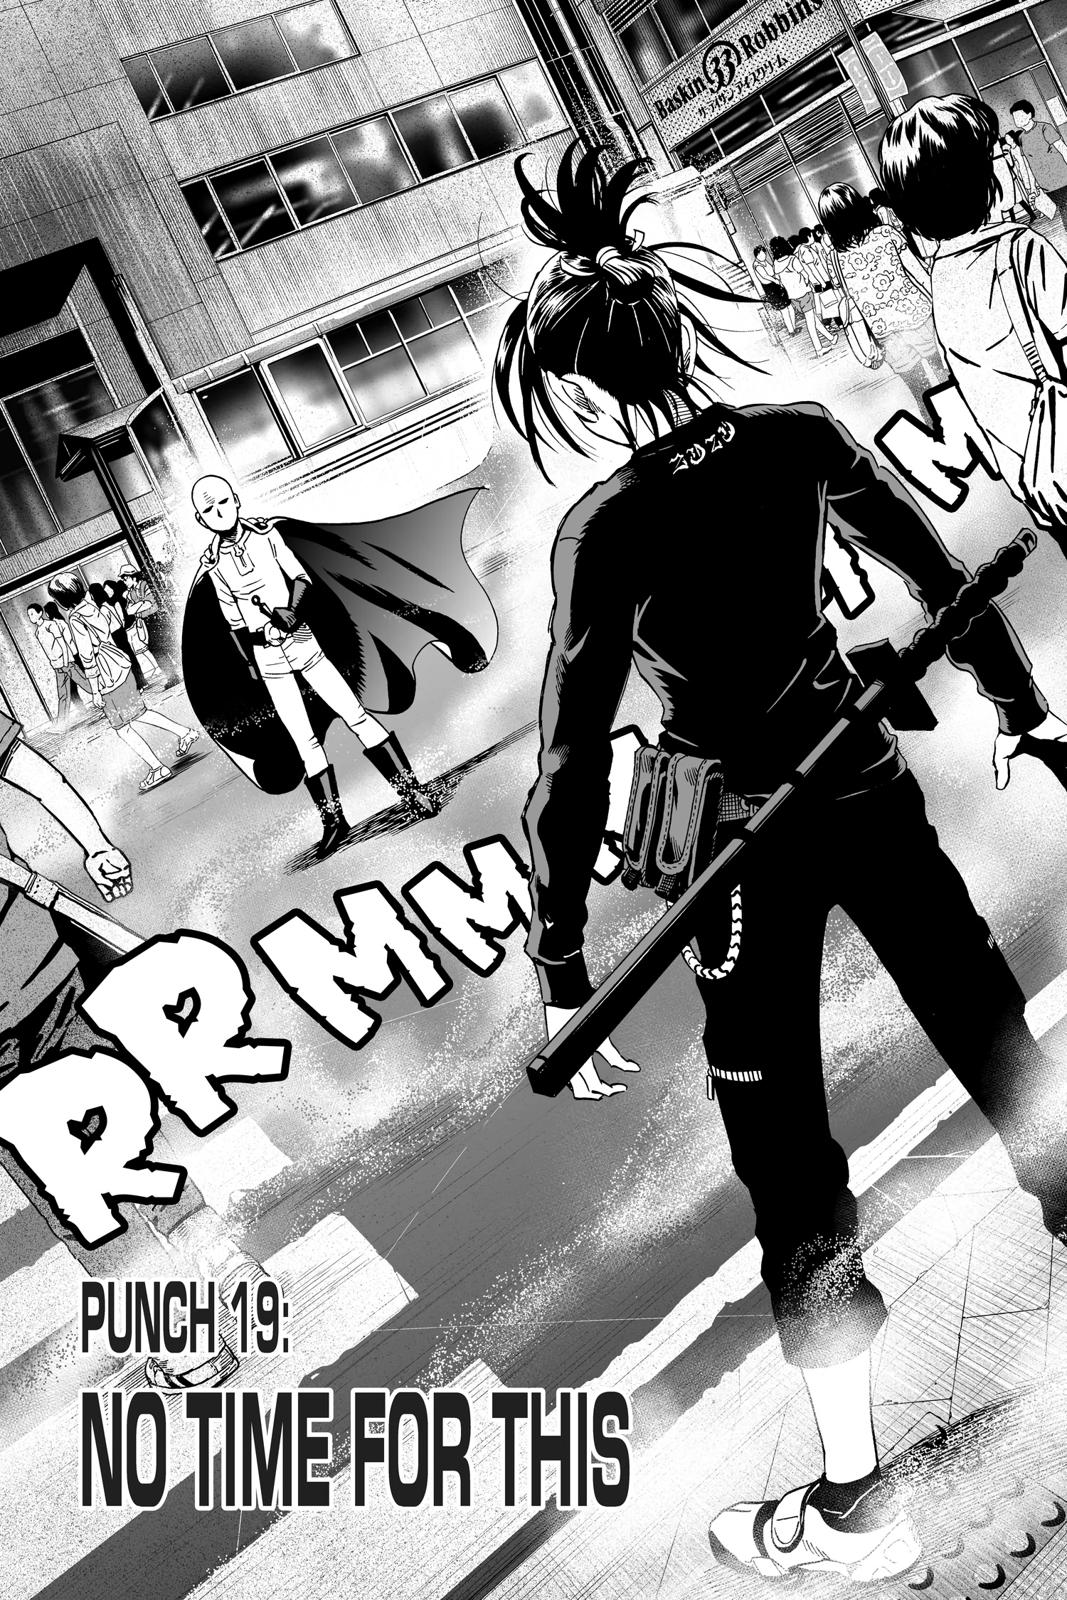 One-Punch Man, Punch 19 image 01